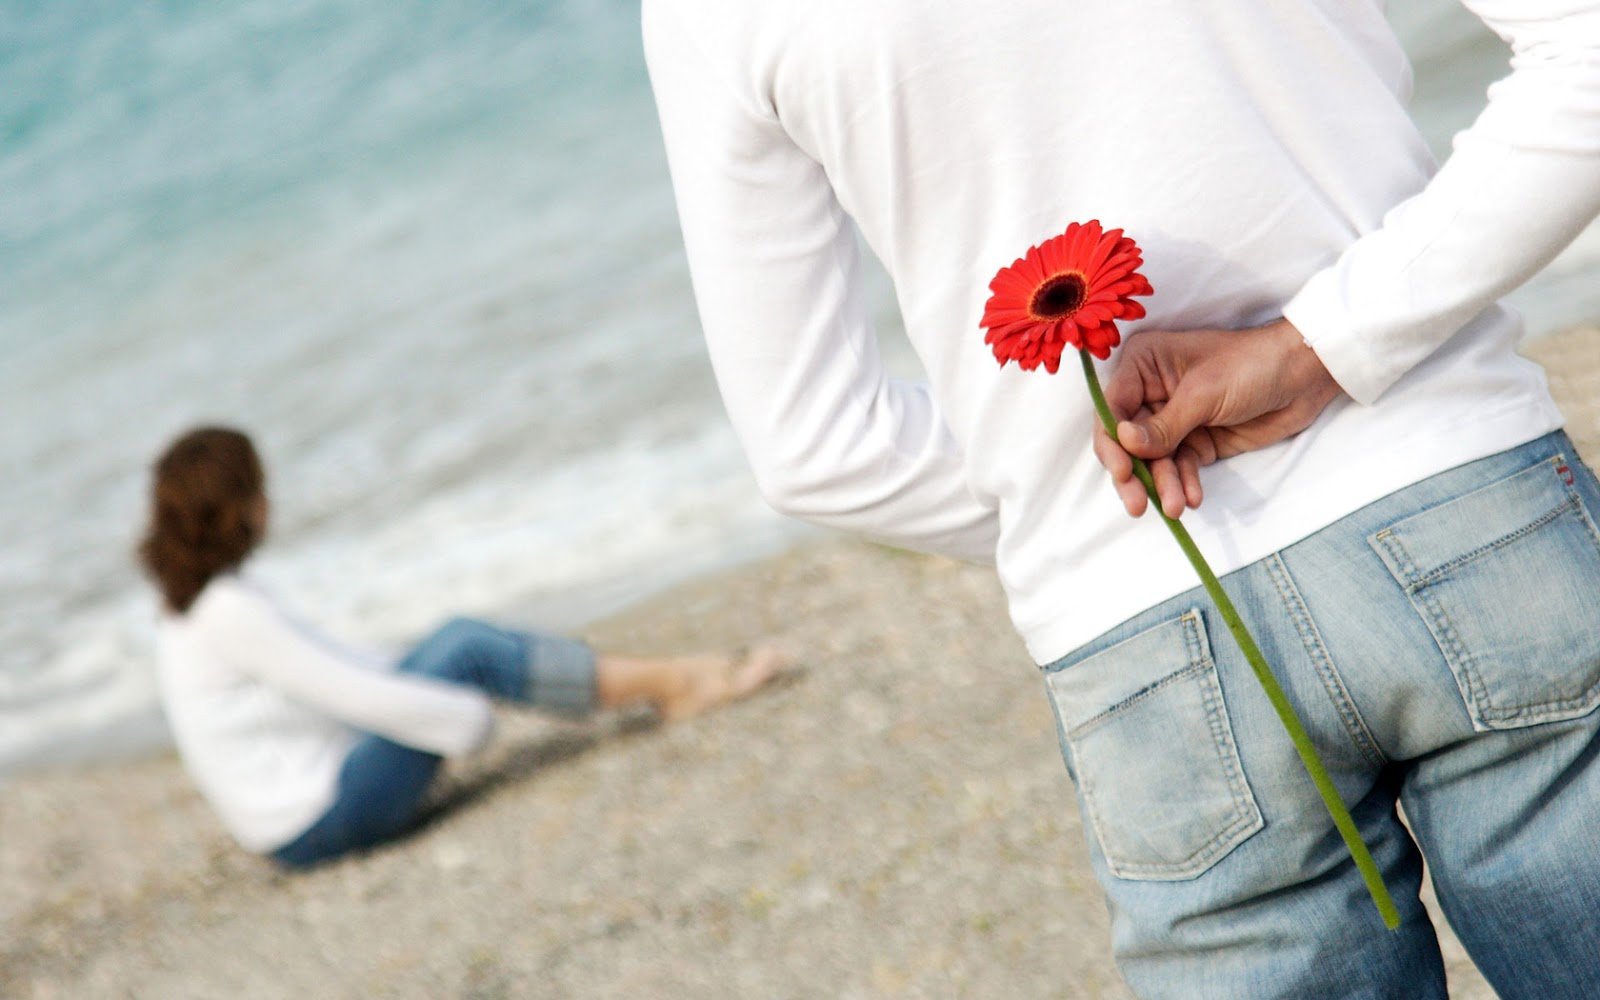 Boy Offering A Rose To Her Girl Friend - Propose Day Images Hd - HD Wallpaper 